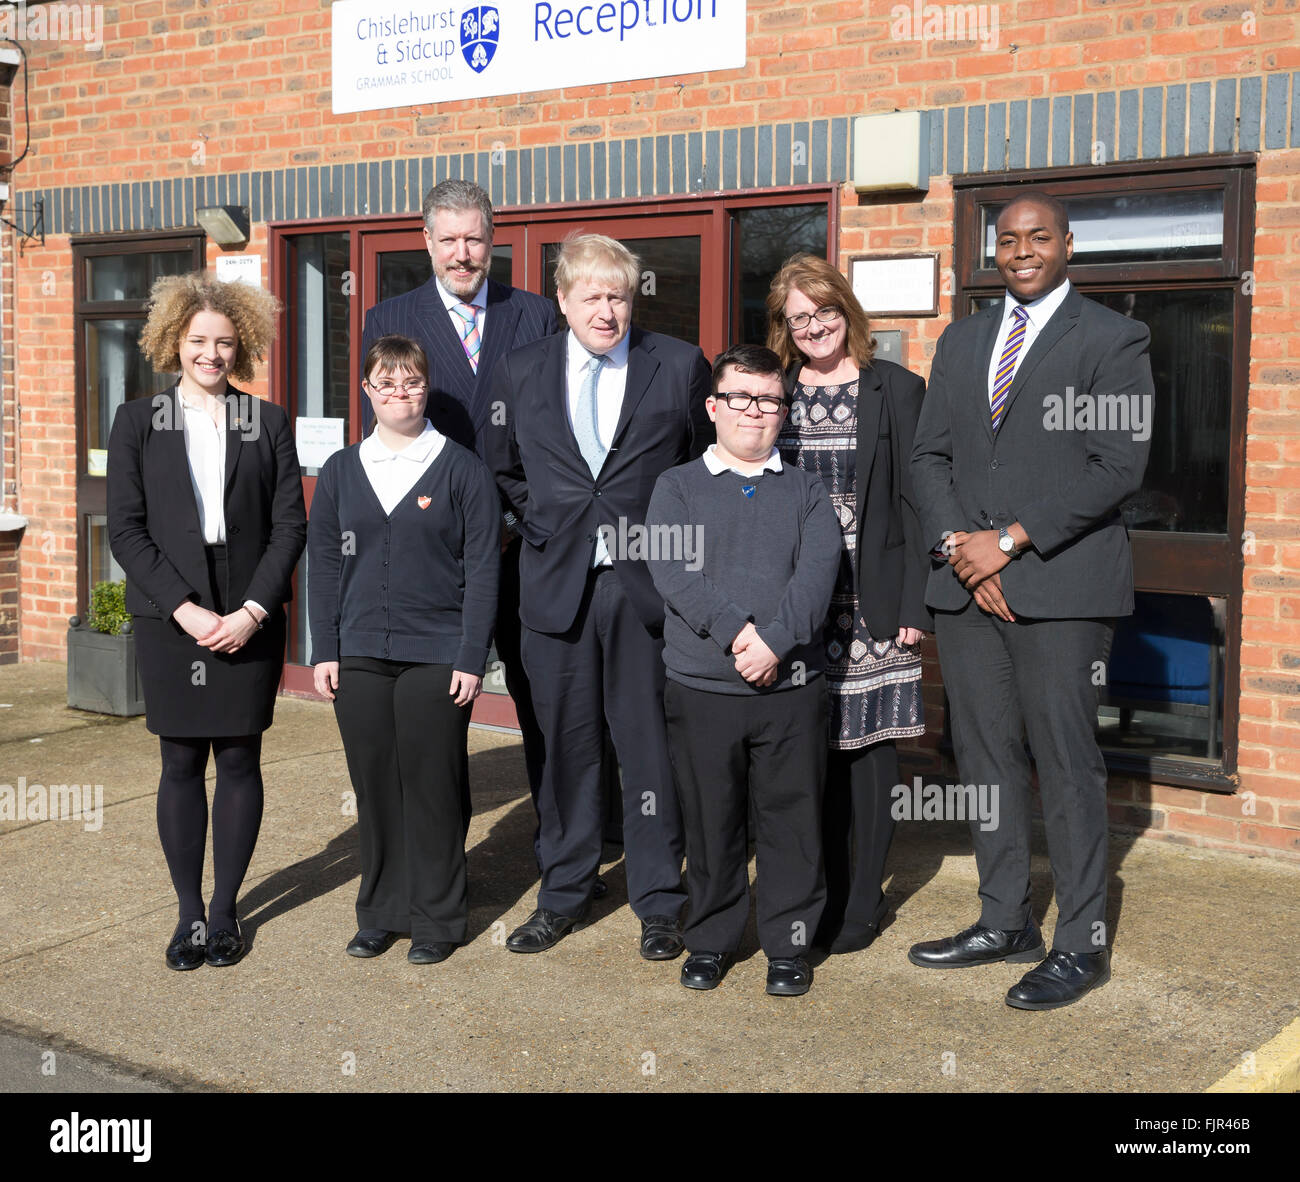 Sidcup, UK. 3rd March, 2016. The Mayor of London Boris Johnson poses with Nigel Walker, head teacher and Linda Lee, head teacher of Marlborough School along with students before he formally opened the new sixth form building at Chislehurst and Sidcup Grammar School, which has been created by re-using one of the buildings from London's 2012 Olympic and Paralympic Game Credit: Keith Larby/Alamy Live News Stock Photo